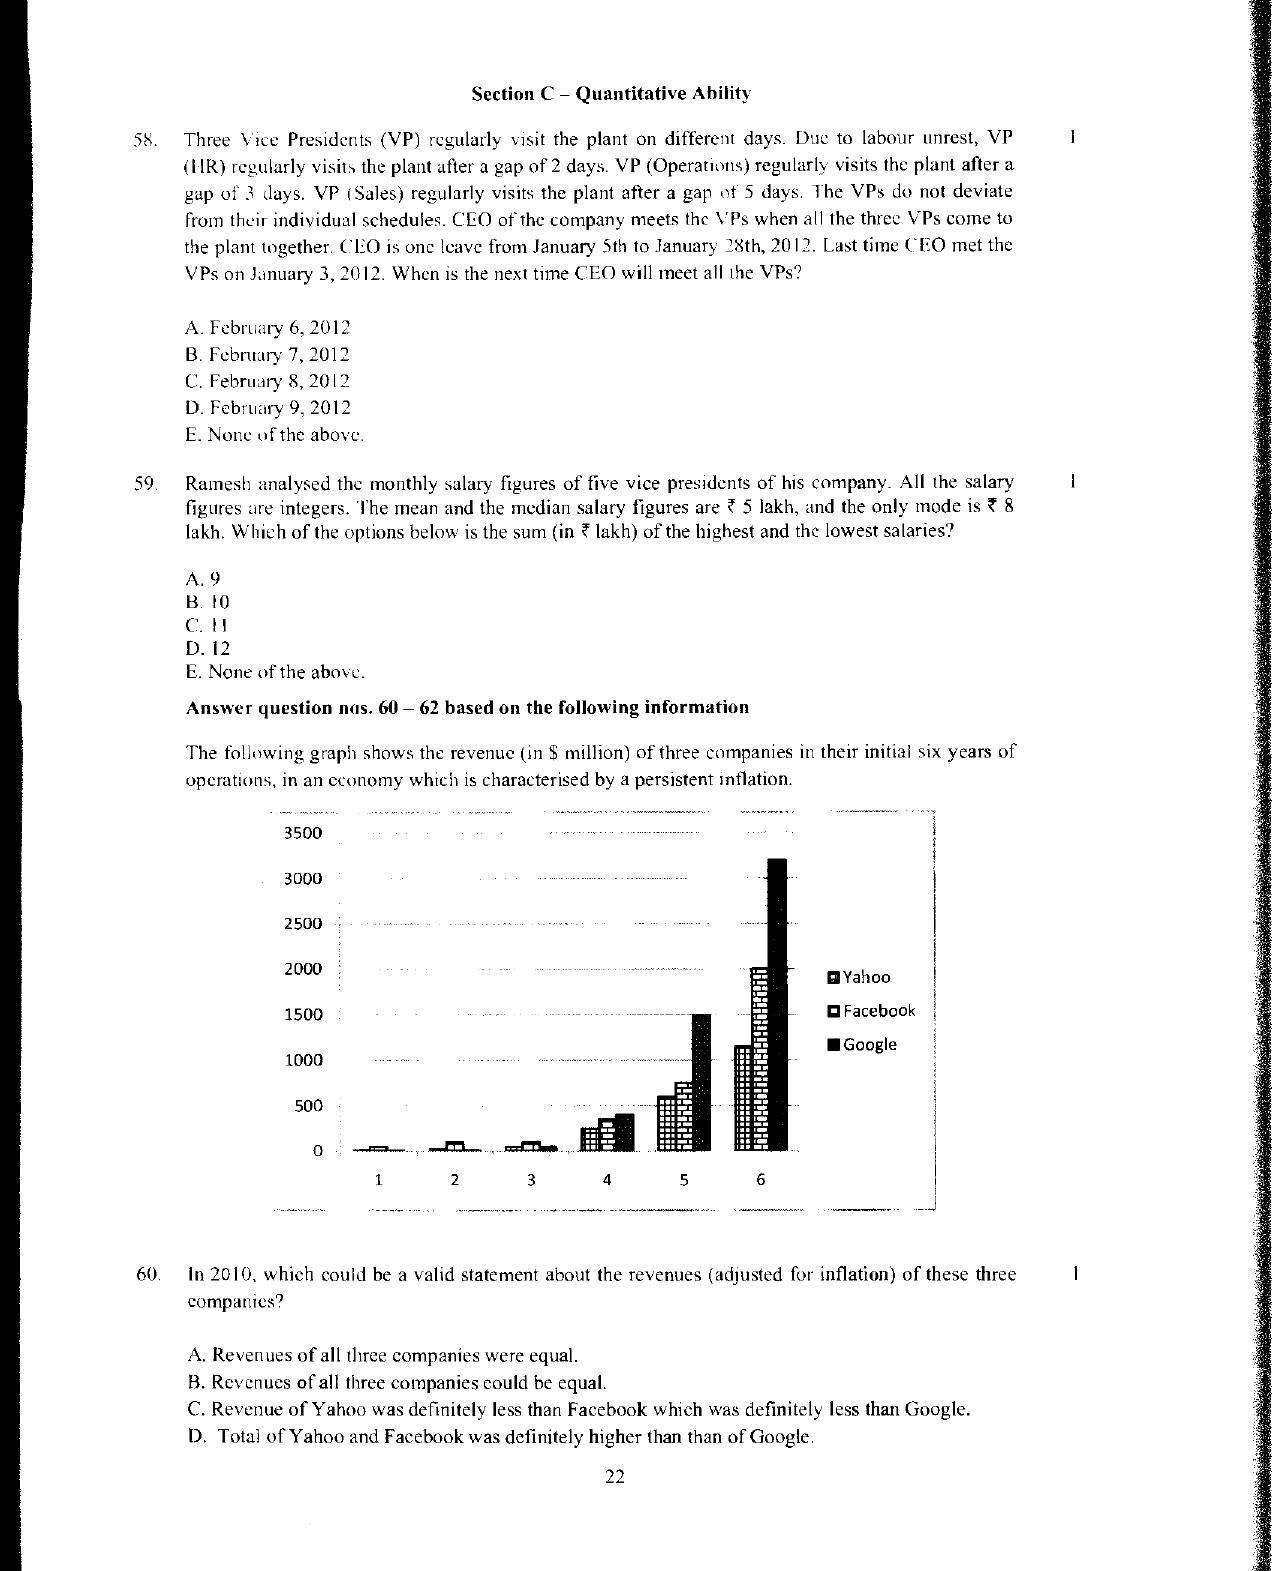 XAT 2012 Question Papers - Page 23